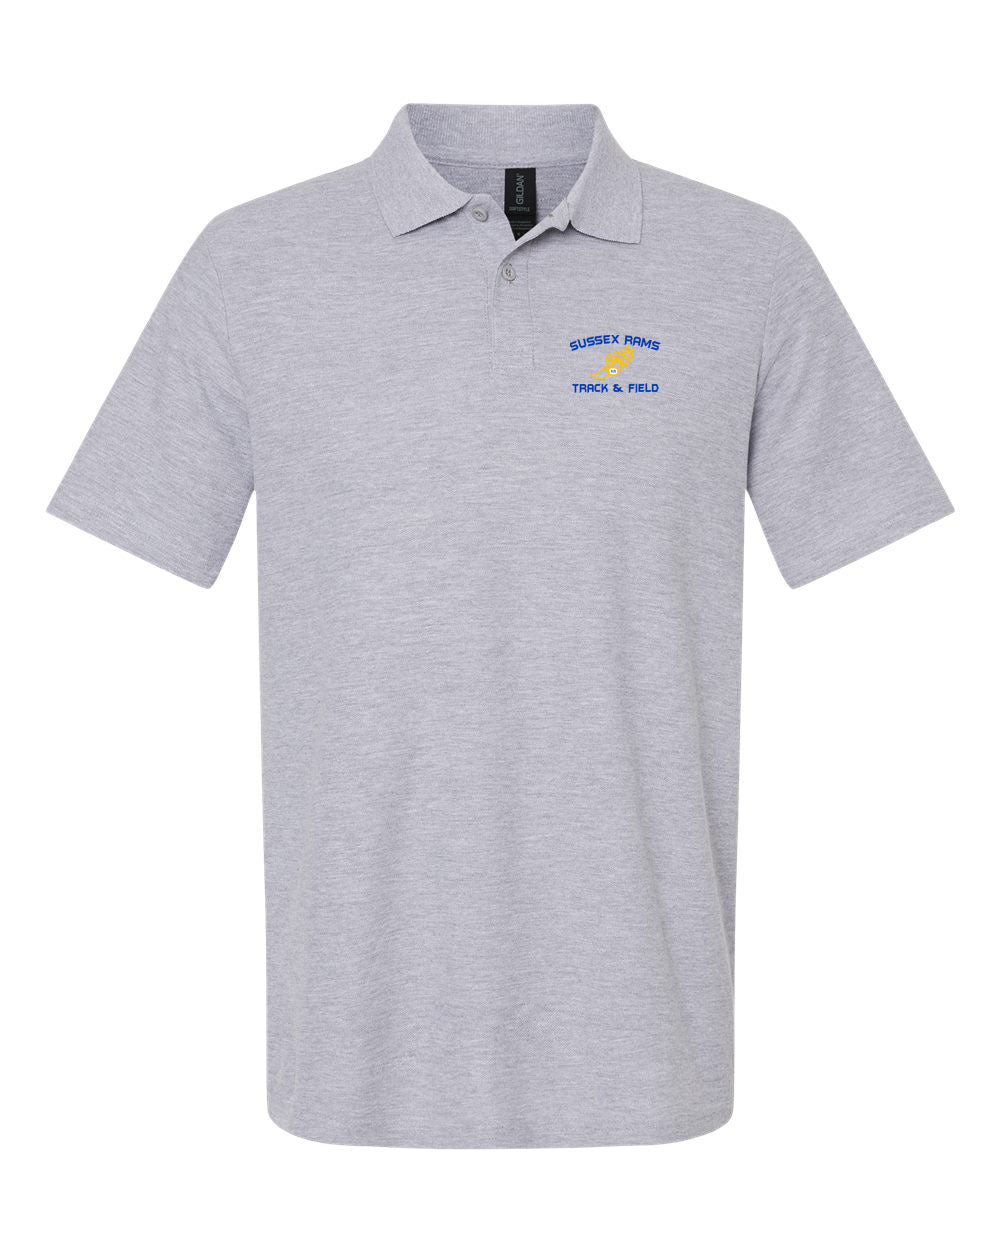 Sussex Rams Track Polo T-Shirt Design 2